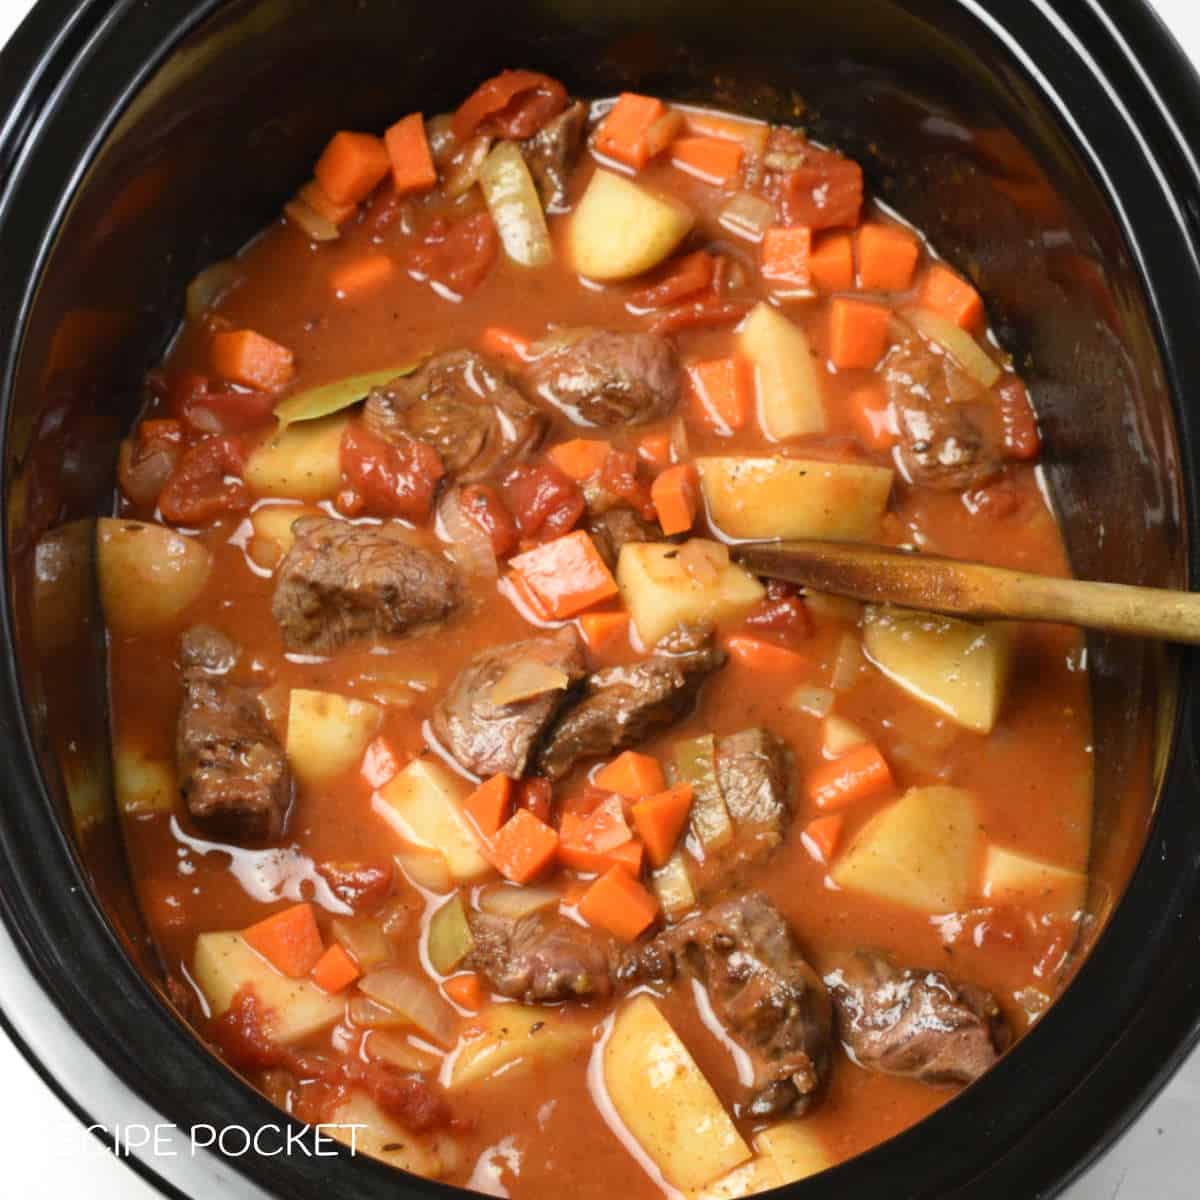 Prepared Hungarian goulash mixture in a slow cooker bowl.